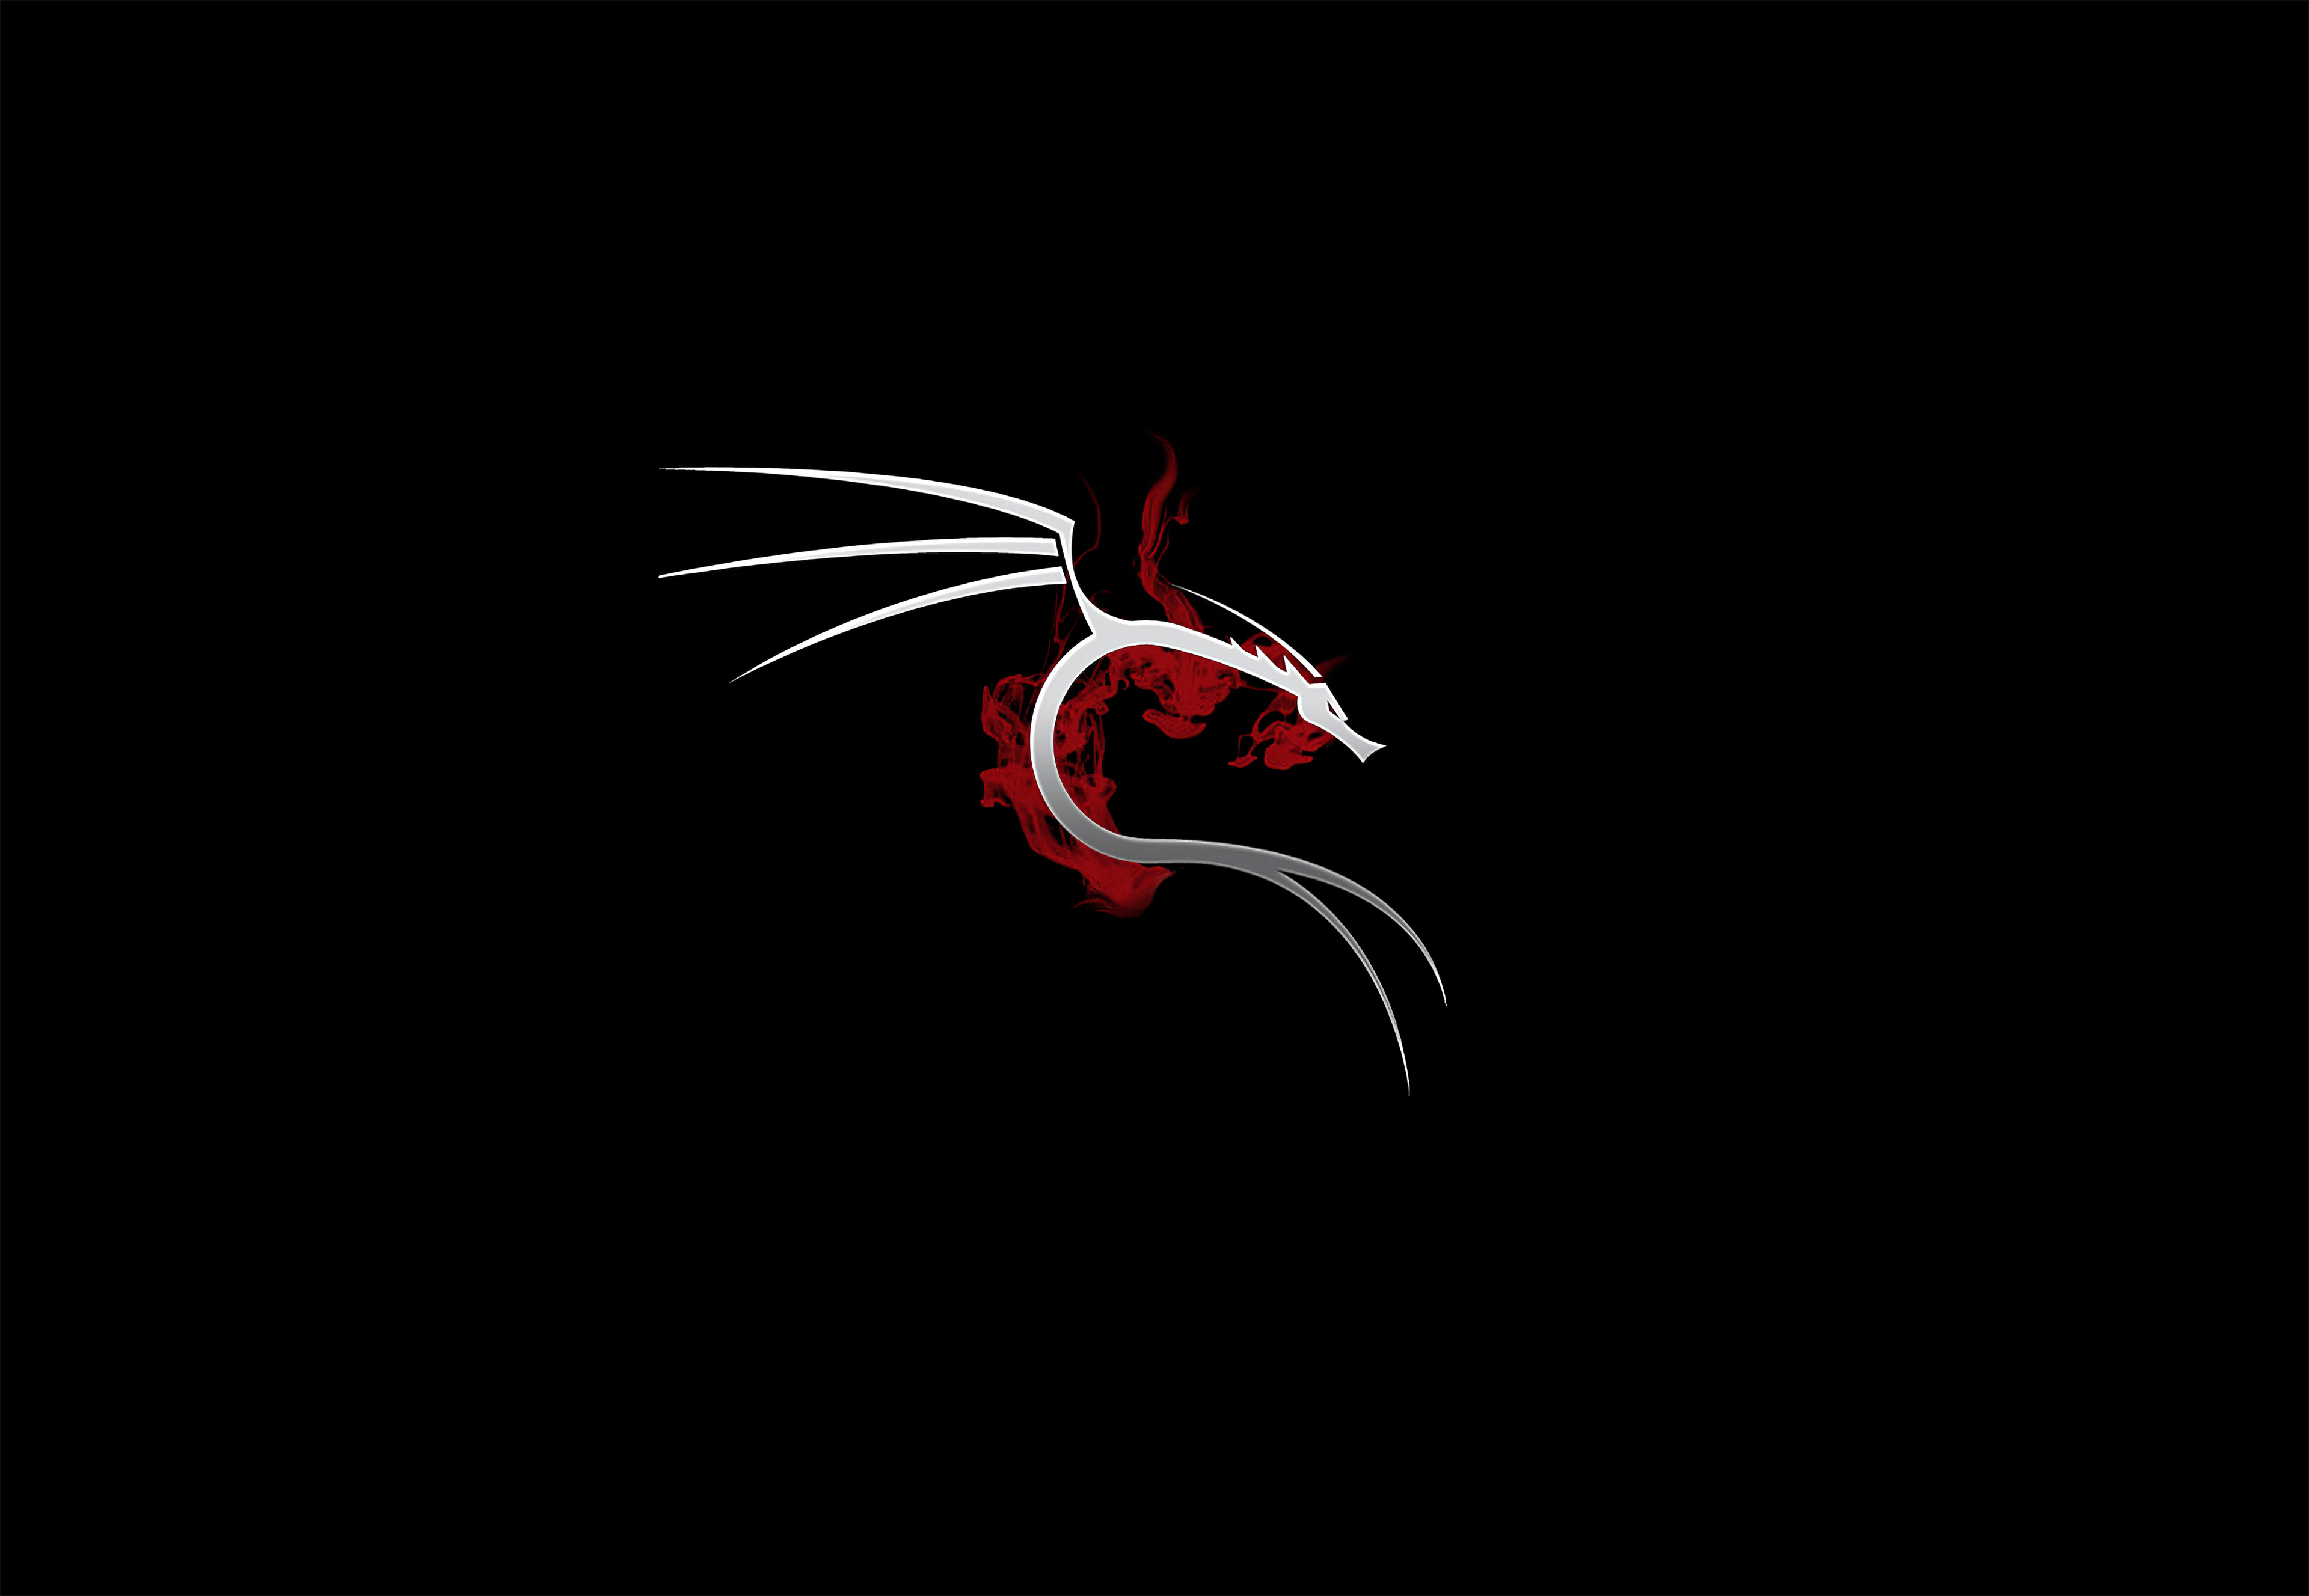 2560x1440 Kali Linux 4k 1440p Resolution Hd 4k Wallpapers Images Backgrounds Photos And Pictures